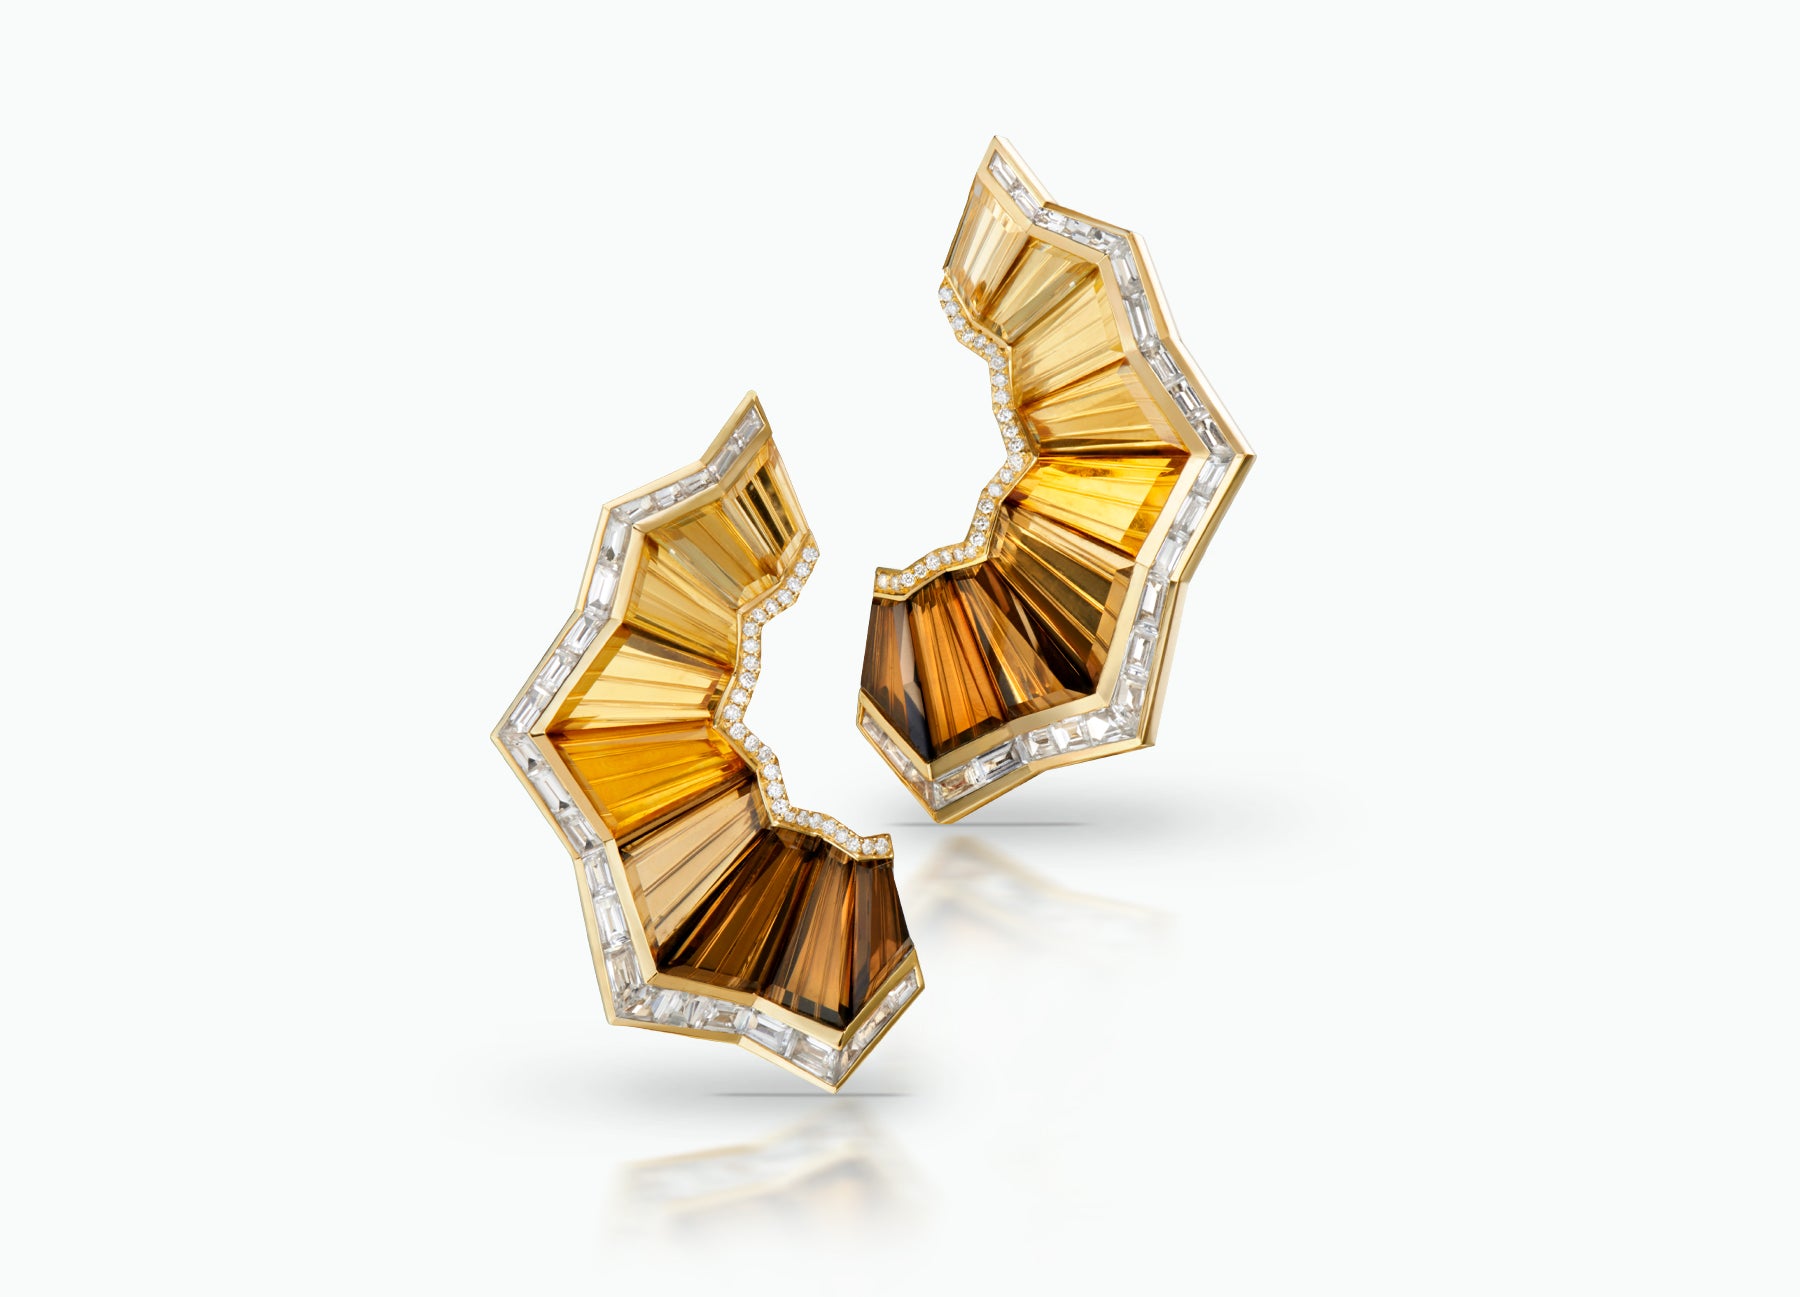 Kaleidoscope Pleat Earrings crafted in 18k yellow Gold and set with smoky Quartz, Citrine, yellow Topaz, clear Crystal, white Sapphires and white Diamonds.